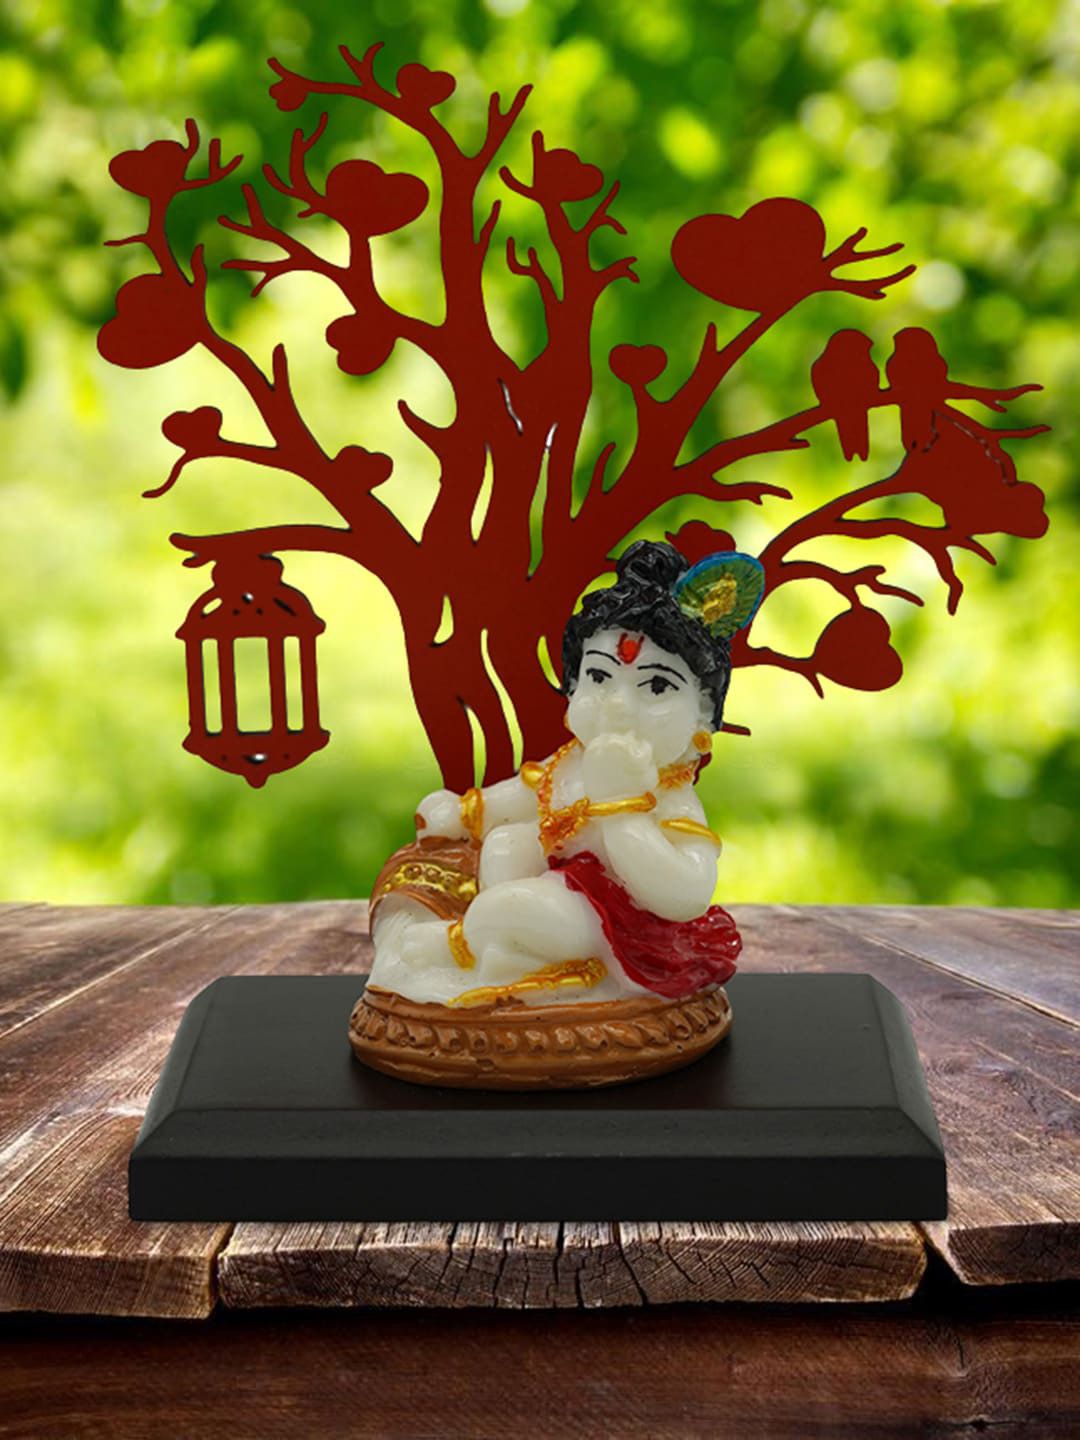 Gallery99 Red & White Bal Krishna Idol Decorative Showpiece with Wooden Tree Price in India